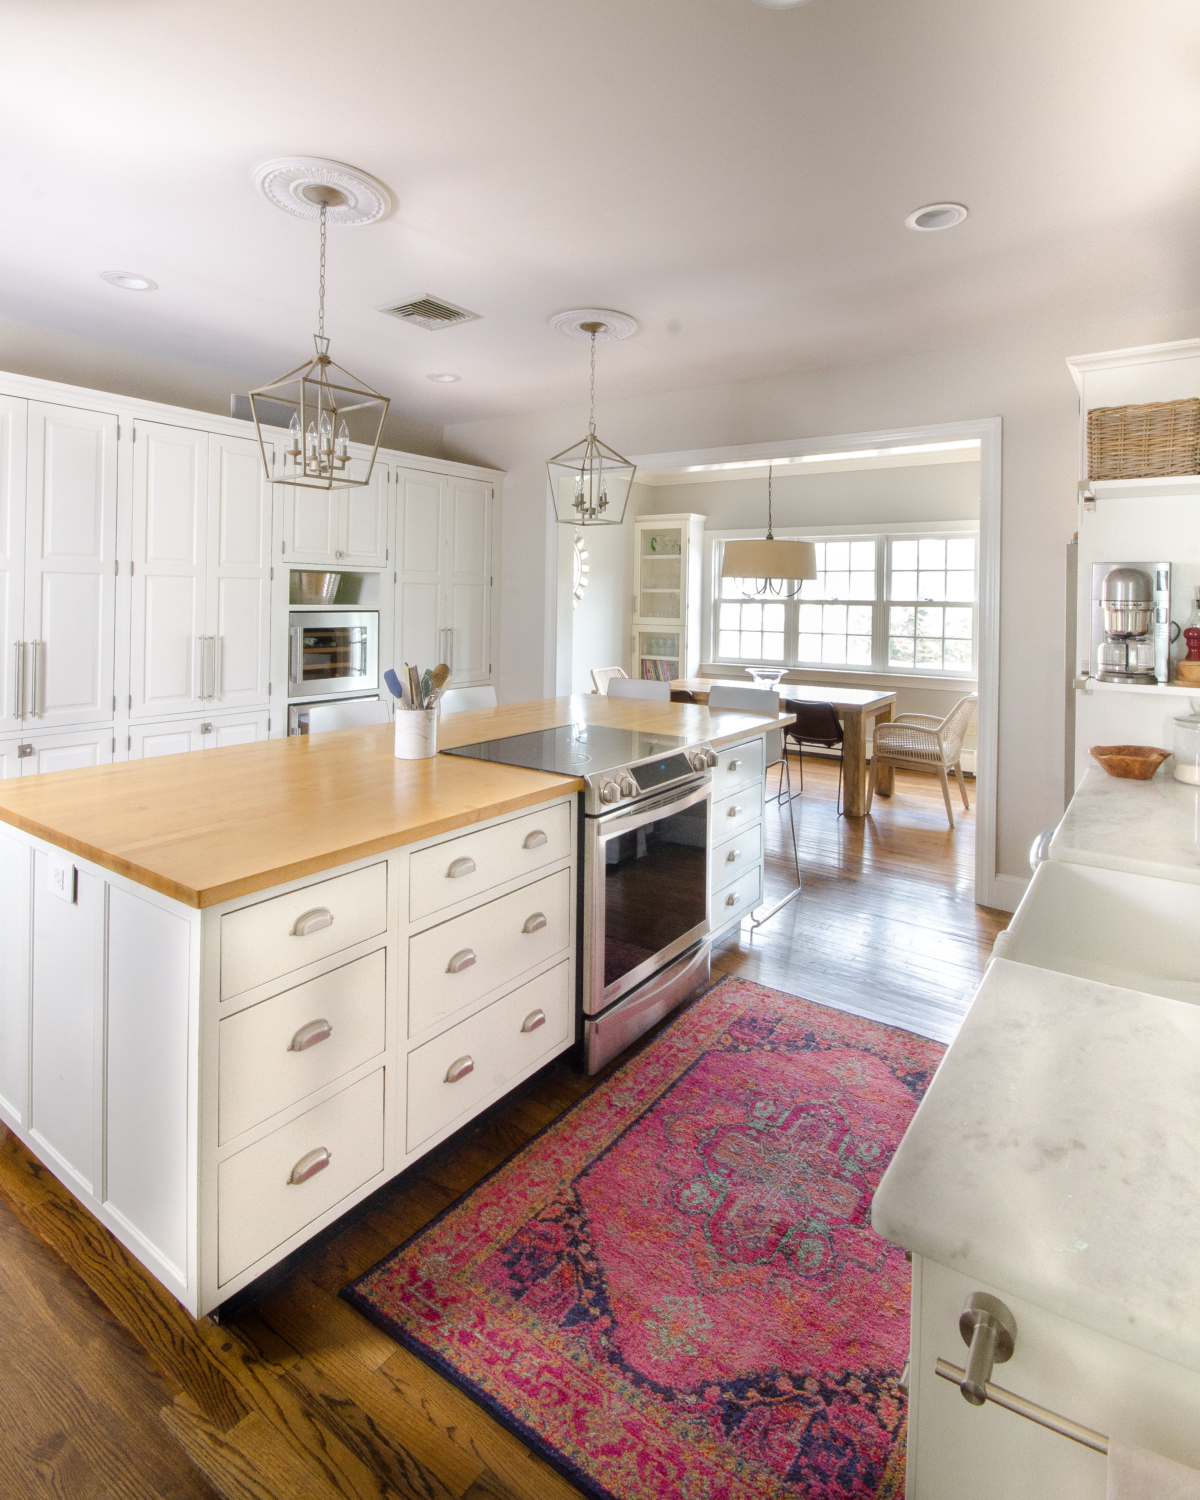 A classic white kitchen with lantern kitchen pendants and warm wood accents. Beautiful mix of traditional and modern in this family-friendly kitchen.